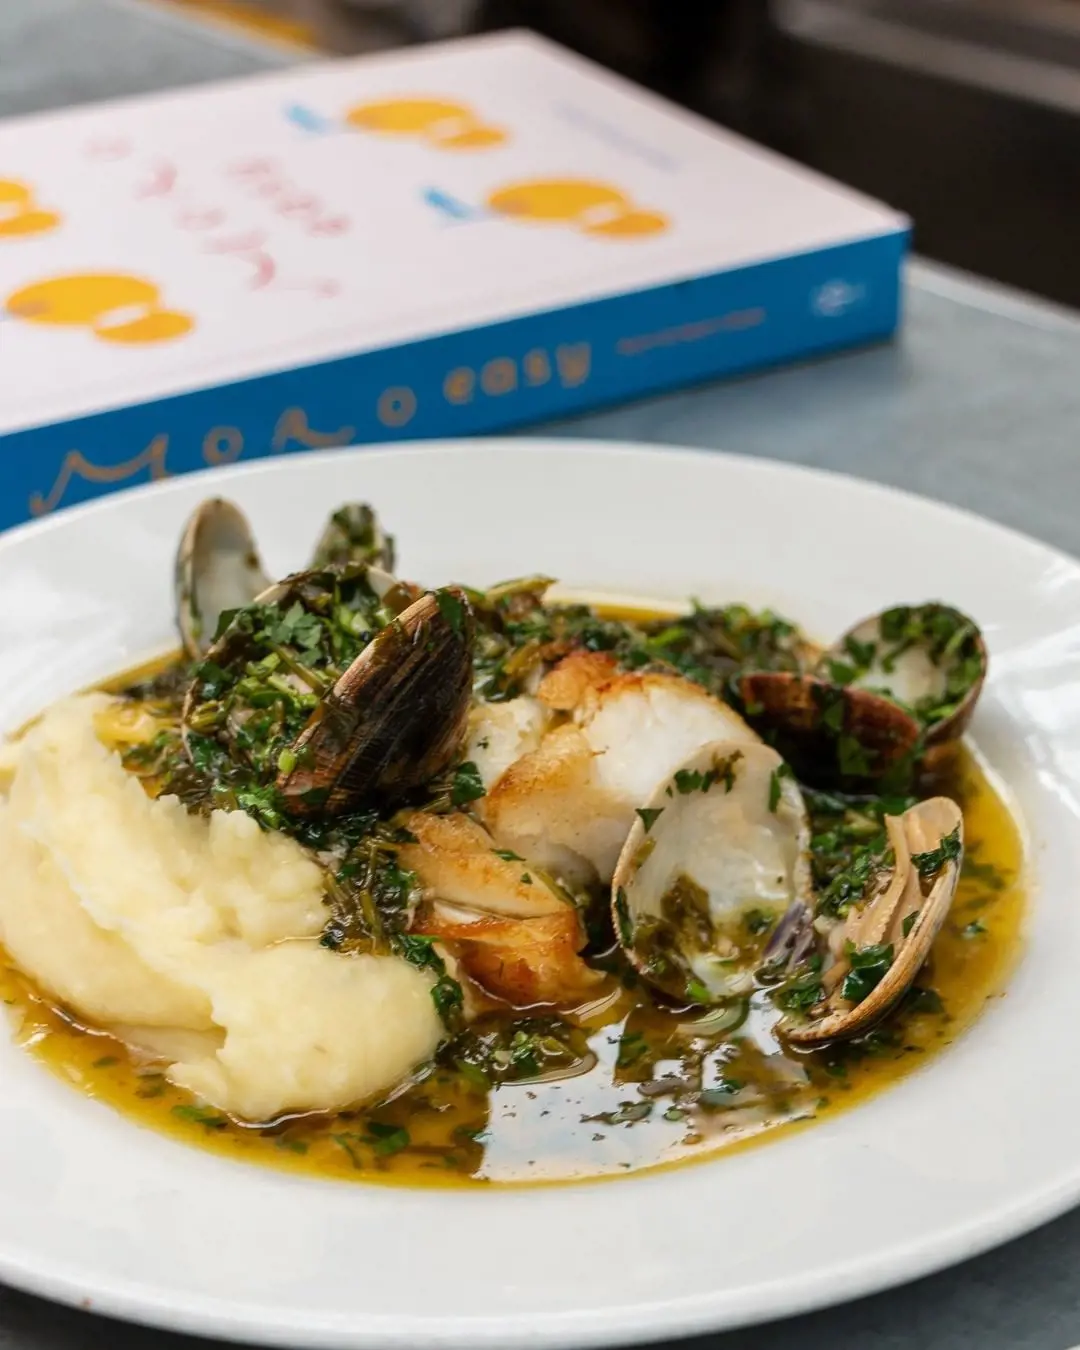 Wood roasted cod with clams, coriander and vinho verde with mashed potato